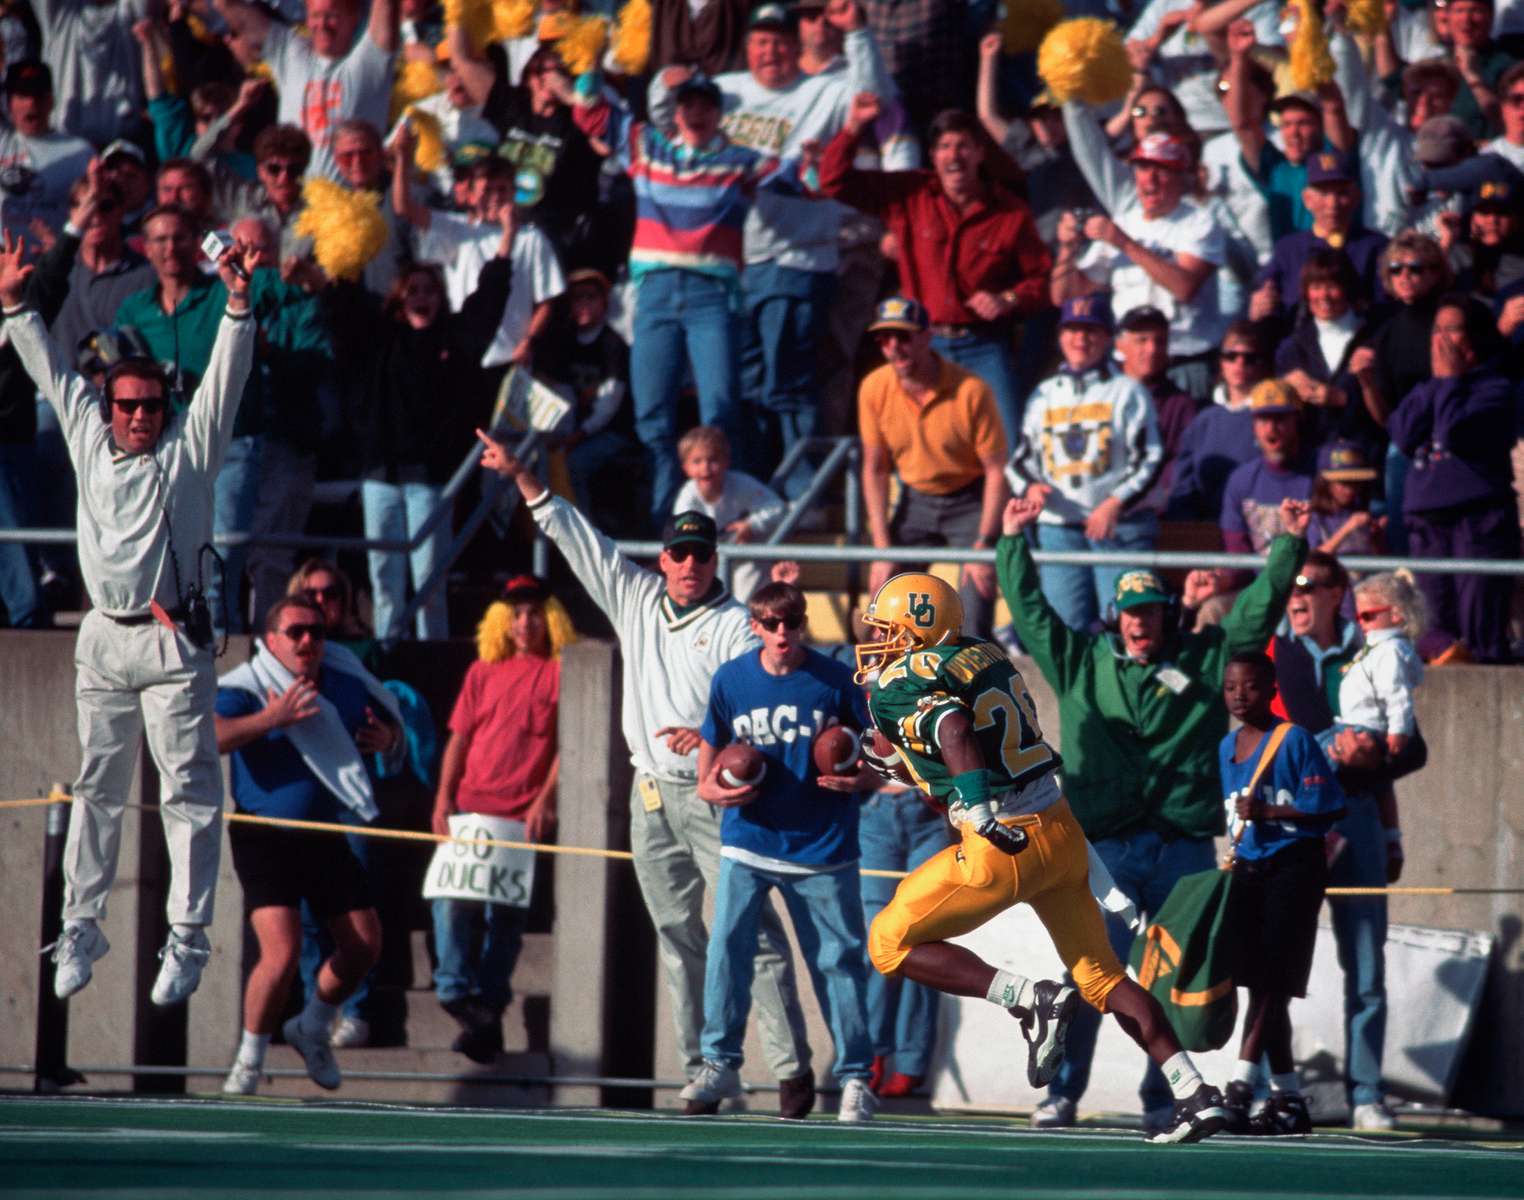 Oregon's Kenny Wheaton returns an interception against Washington in 1994 for a game-winning touchdown starting the Ducks on the path to the 1995 Rose Bowl.